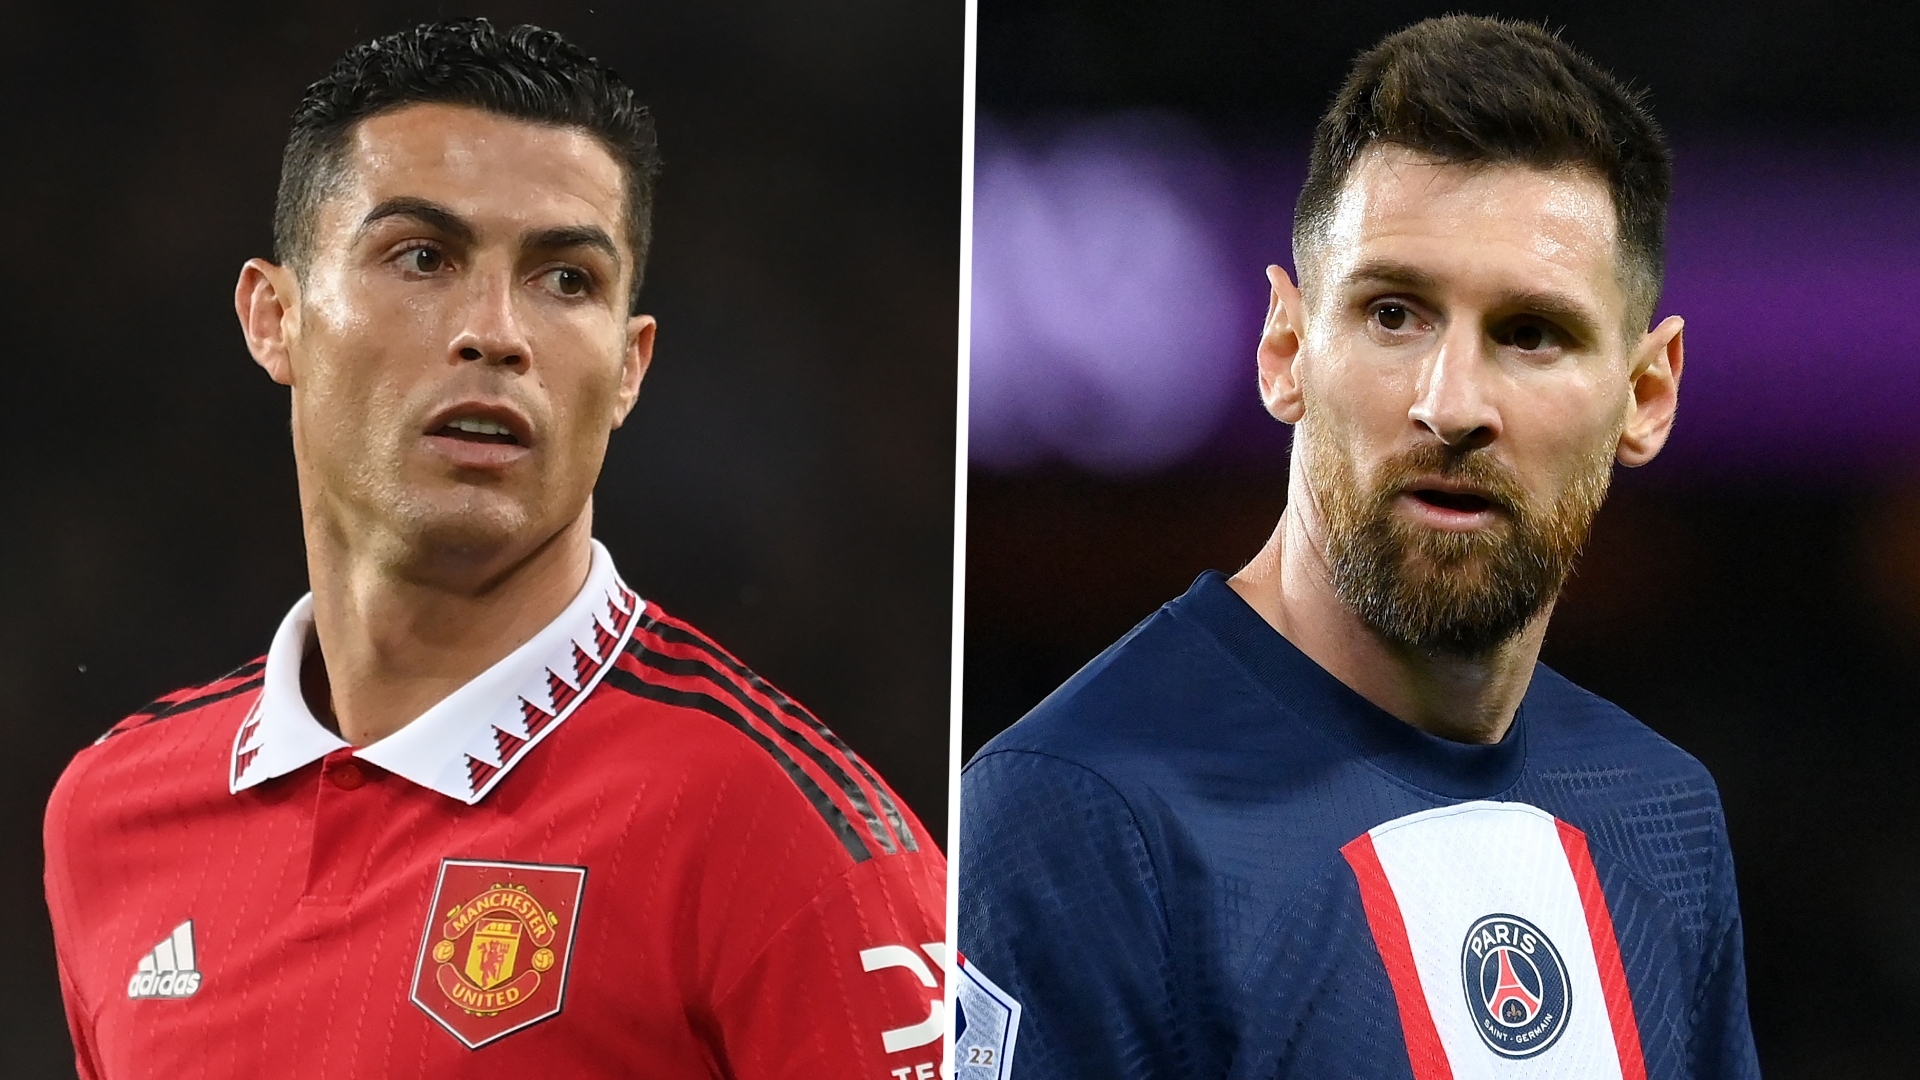 Piers Morgan reveals bombshell interview with Cristiano Ronaldo includes a thrilling discussion about his GOAT rival Lionel Messi that will make 'HUGE headlines' - Bóng Đá